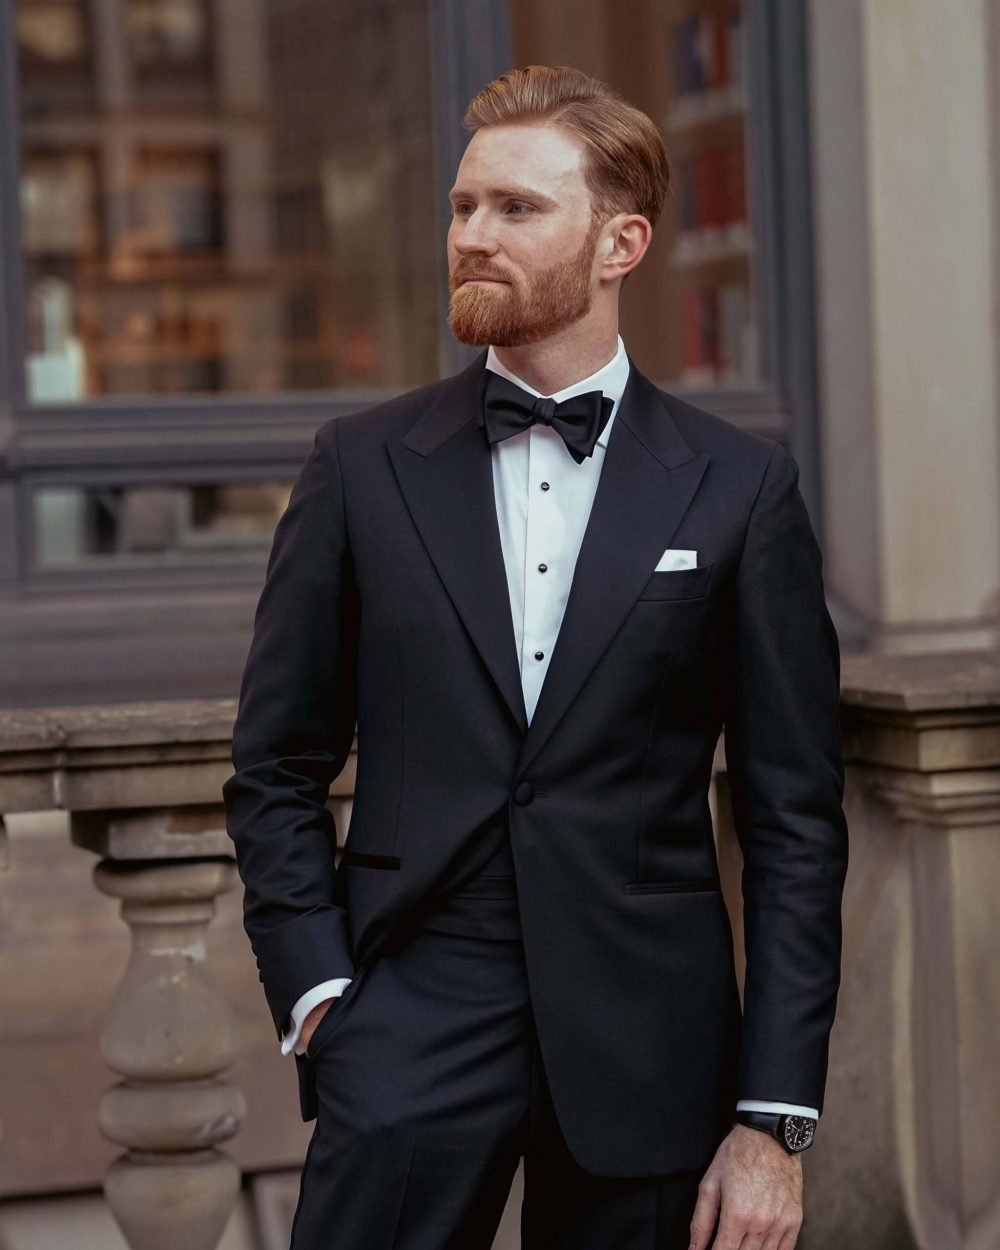 Black-tie Dress Code Explained - Mond - All about the Smoking